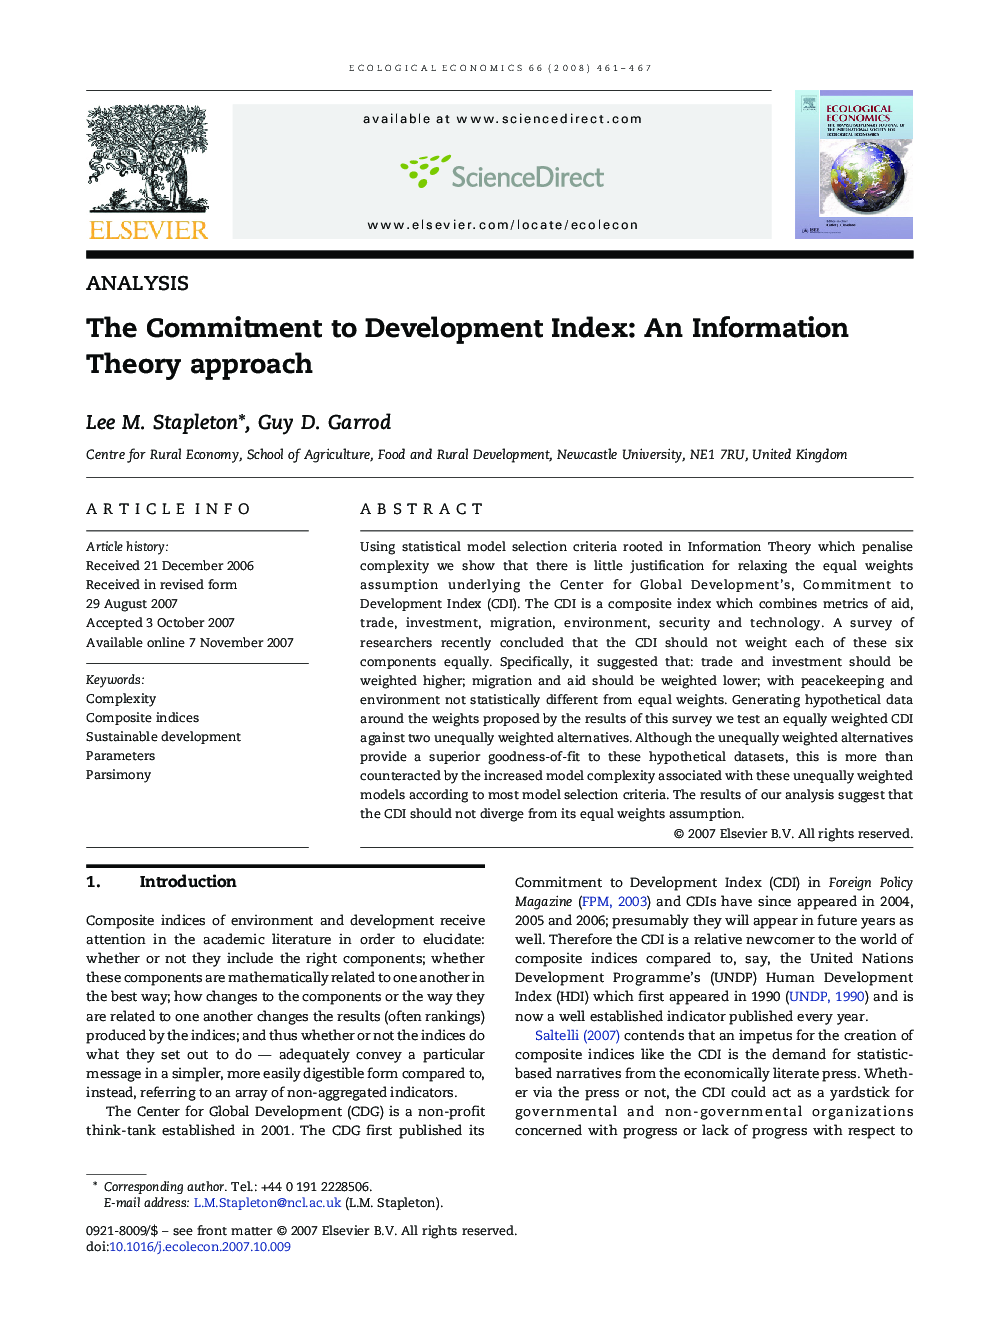 The Commitment to Development Index: An Information Theory approach